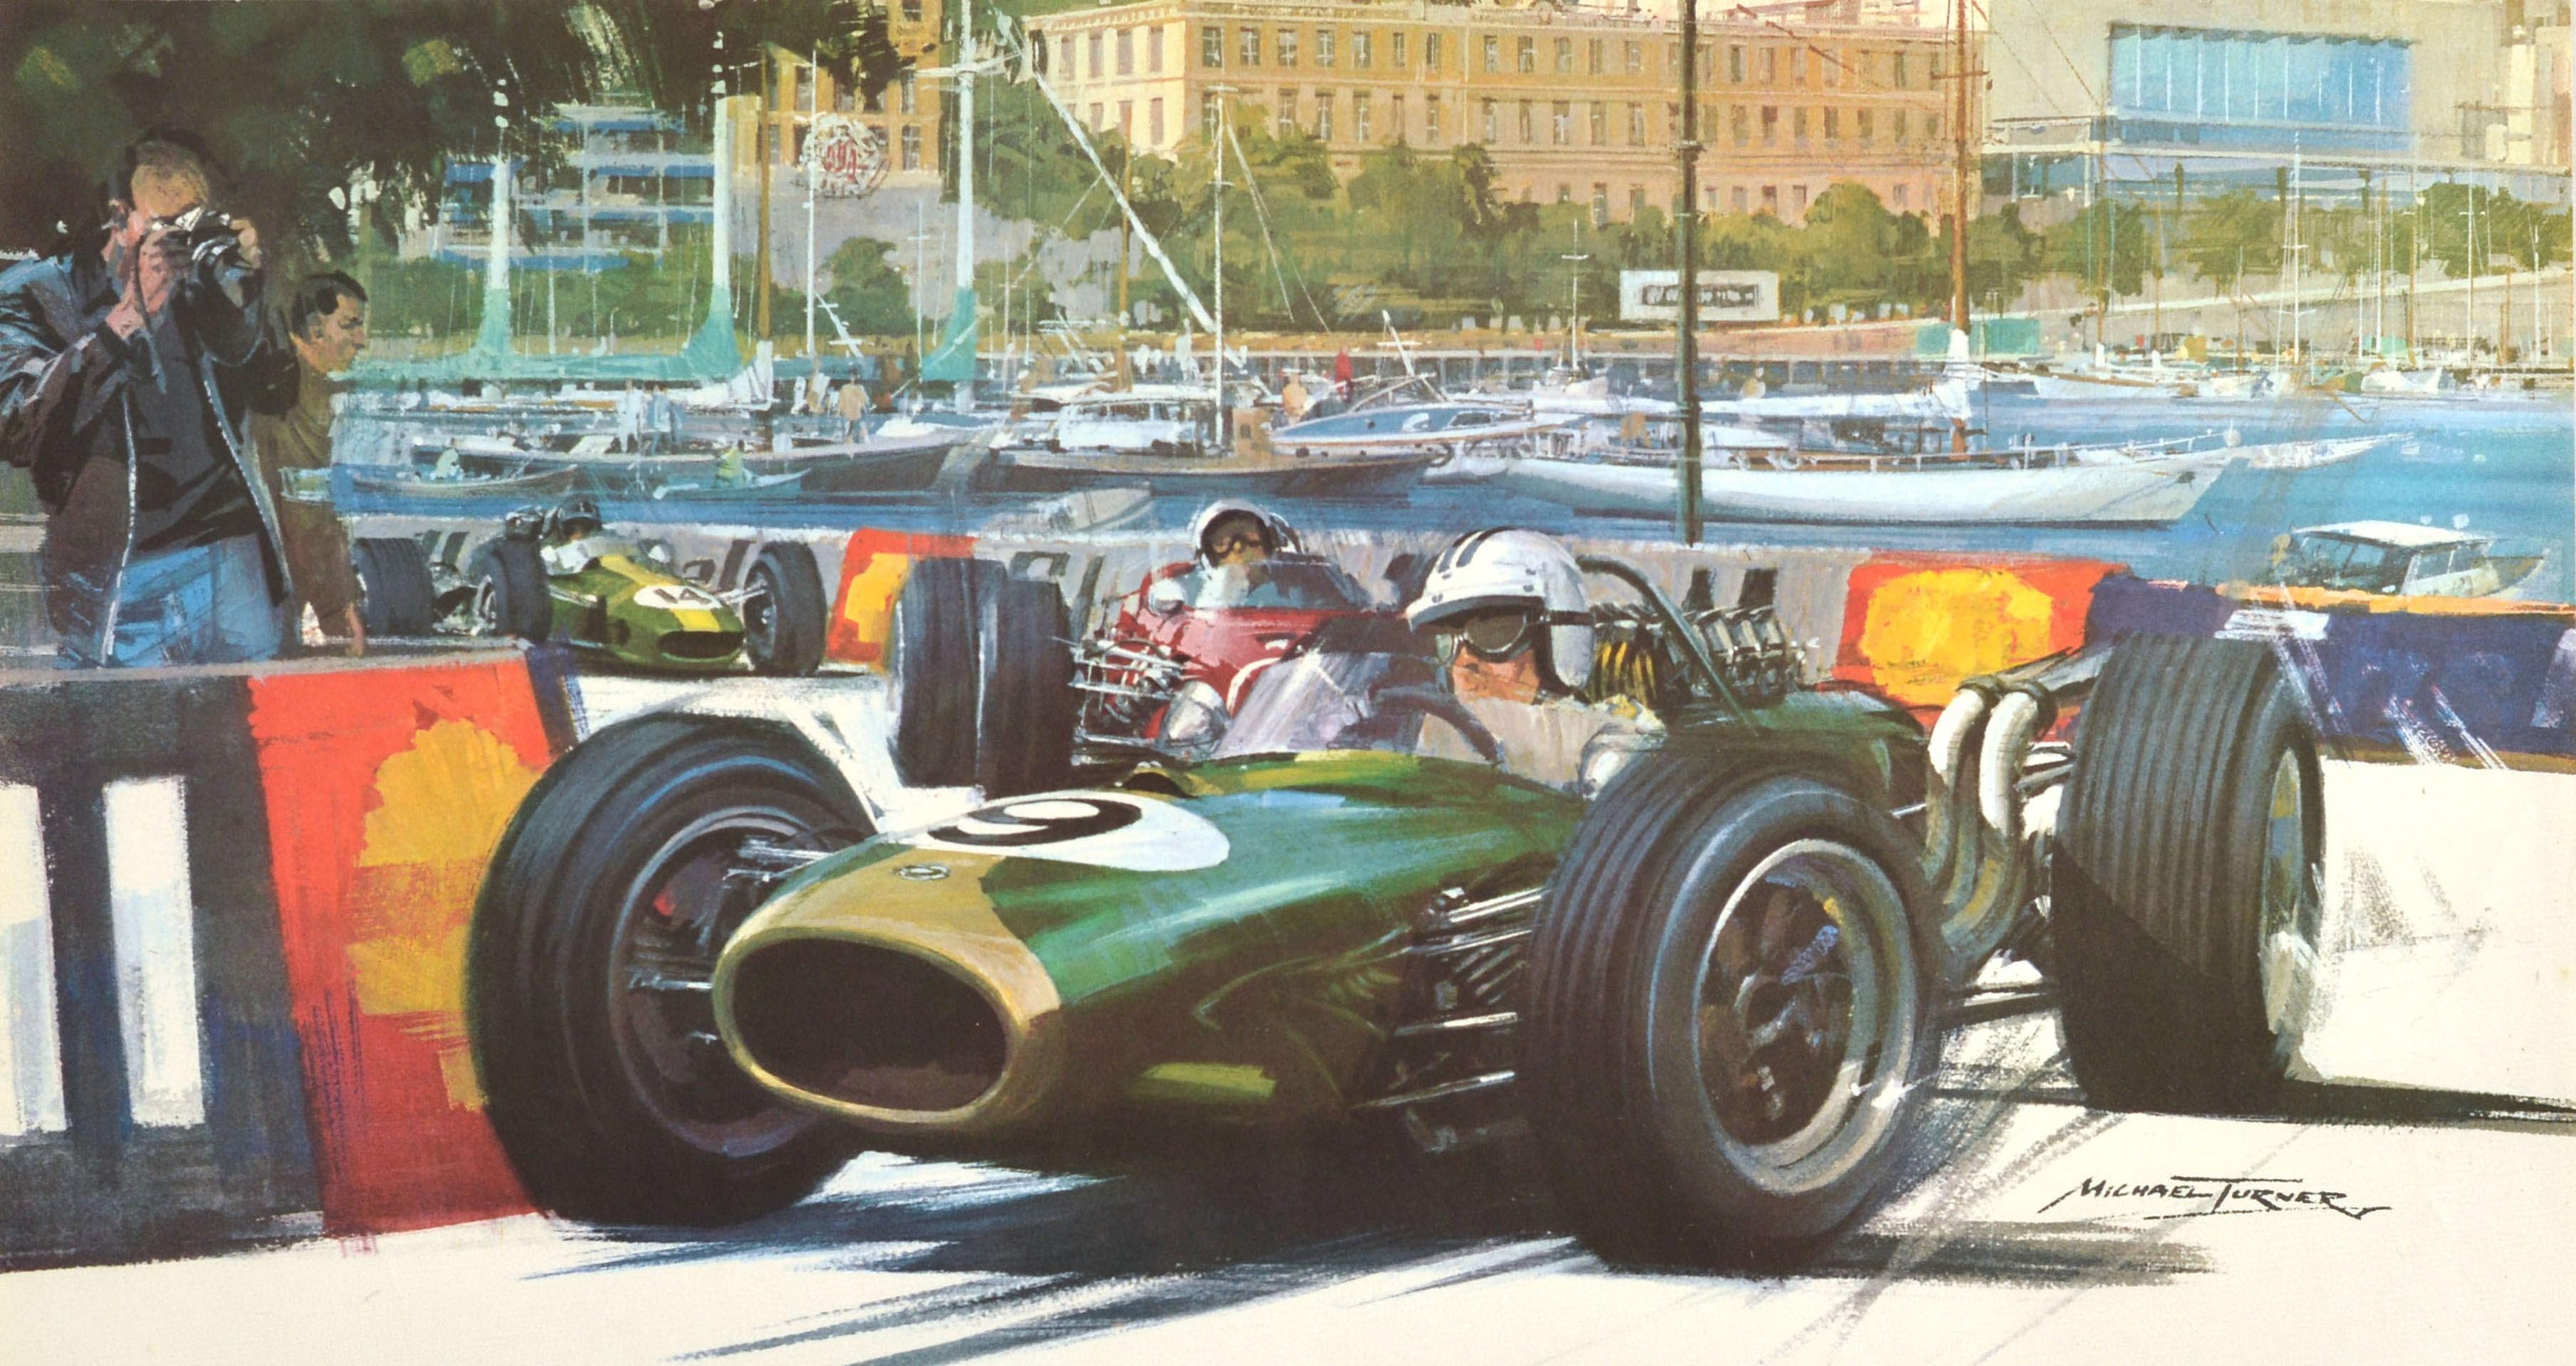 Original vintage F1 motor sport poster for the Monaco Grand Prix 1968 on 25/26 May featuring a dynamic design depicting a green number 9 racing car leading the GP race speeding by Shell advertising boards with a photographer catching the action on